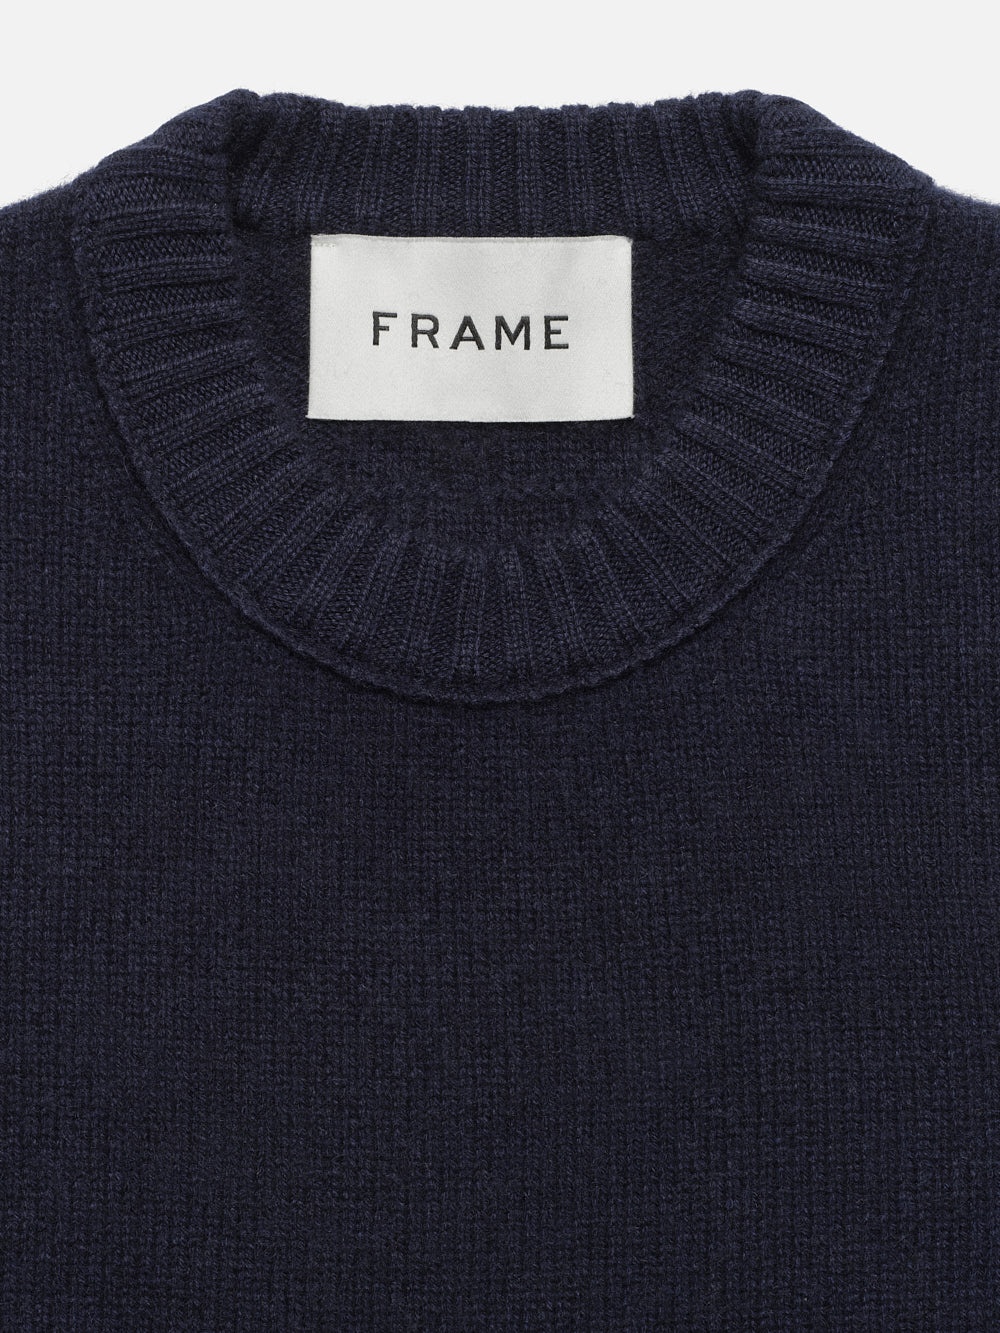 The Cashmere Crewneck Sweater in Navy - 2